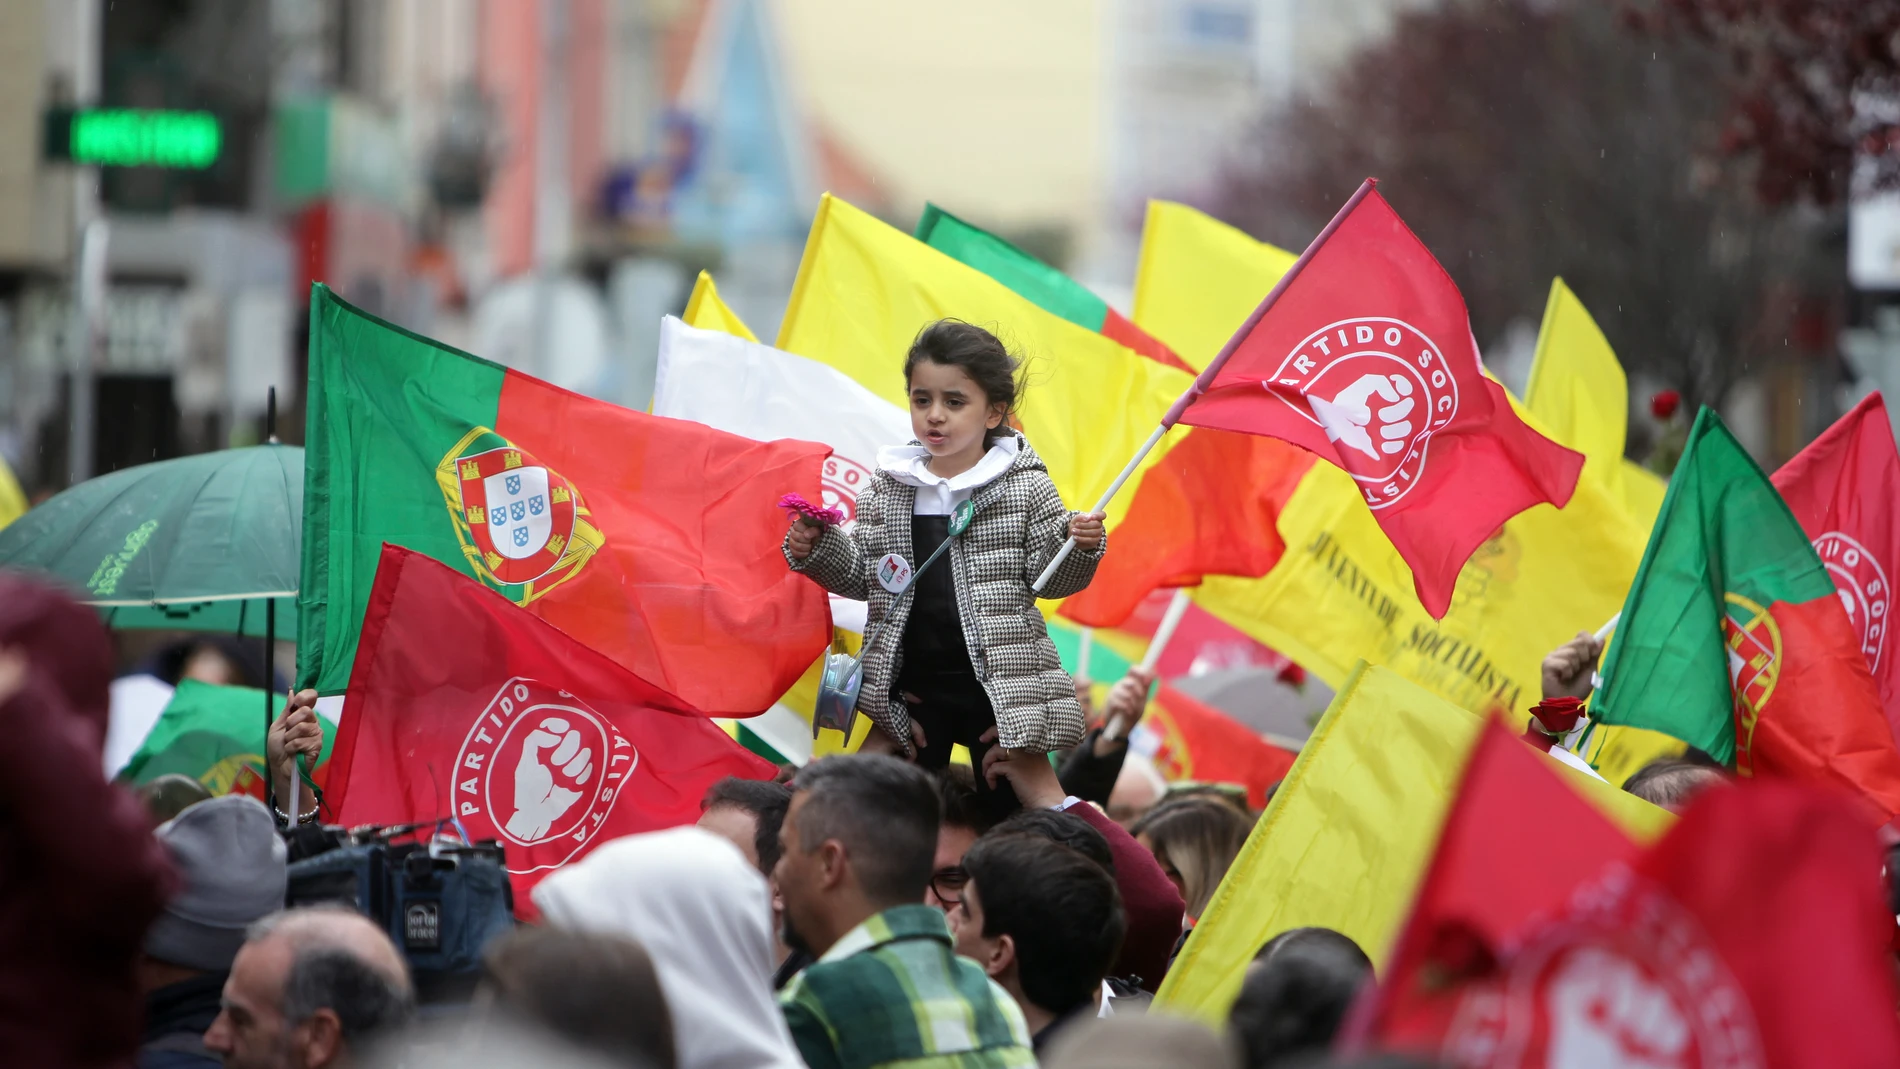 A child holding a flower and a Socialist Party flag is lifted above the crowd during an election campaign action with the Socialist Party leader Pedro Nuno Santos on the street in the Lisbon suburb of Moscavide, Friday, March 8, 2024. Portugal is holding an early general election on Sunday when 10.8 million registered voters elect 230 lawmakers to the National Assembly, the country's Parliament. (AP Photo/Joao Henriques)